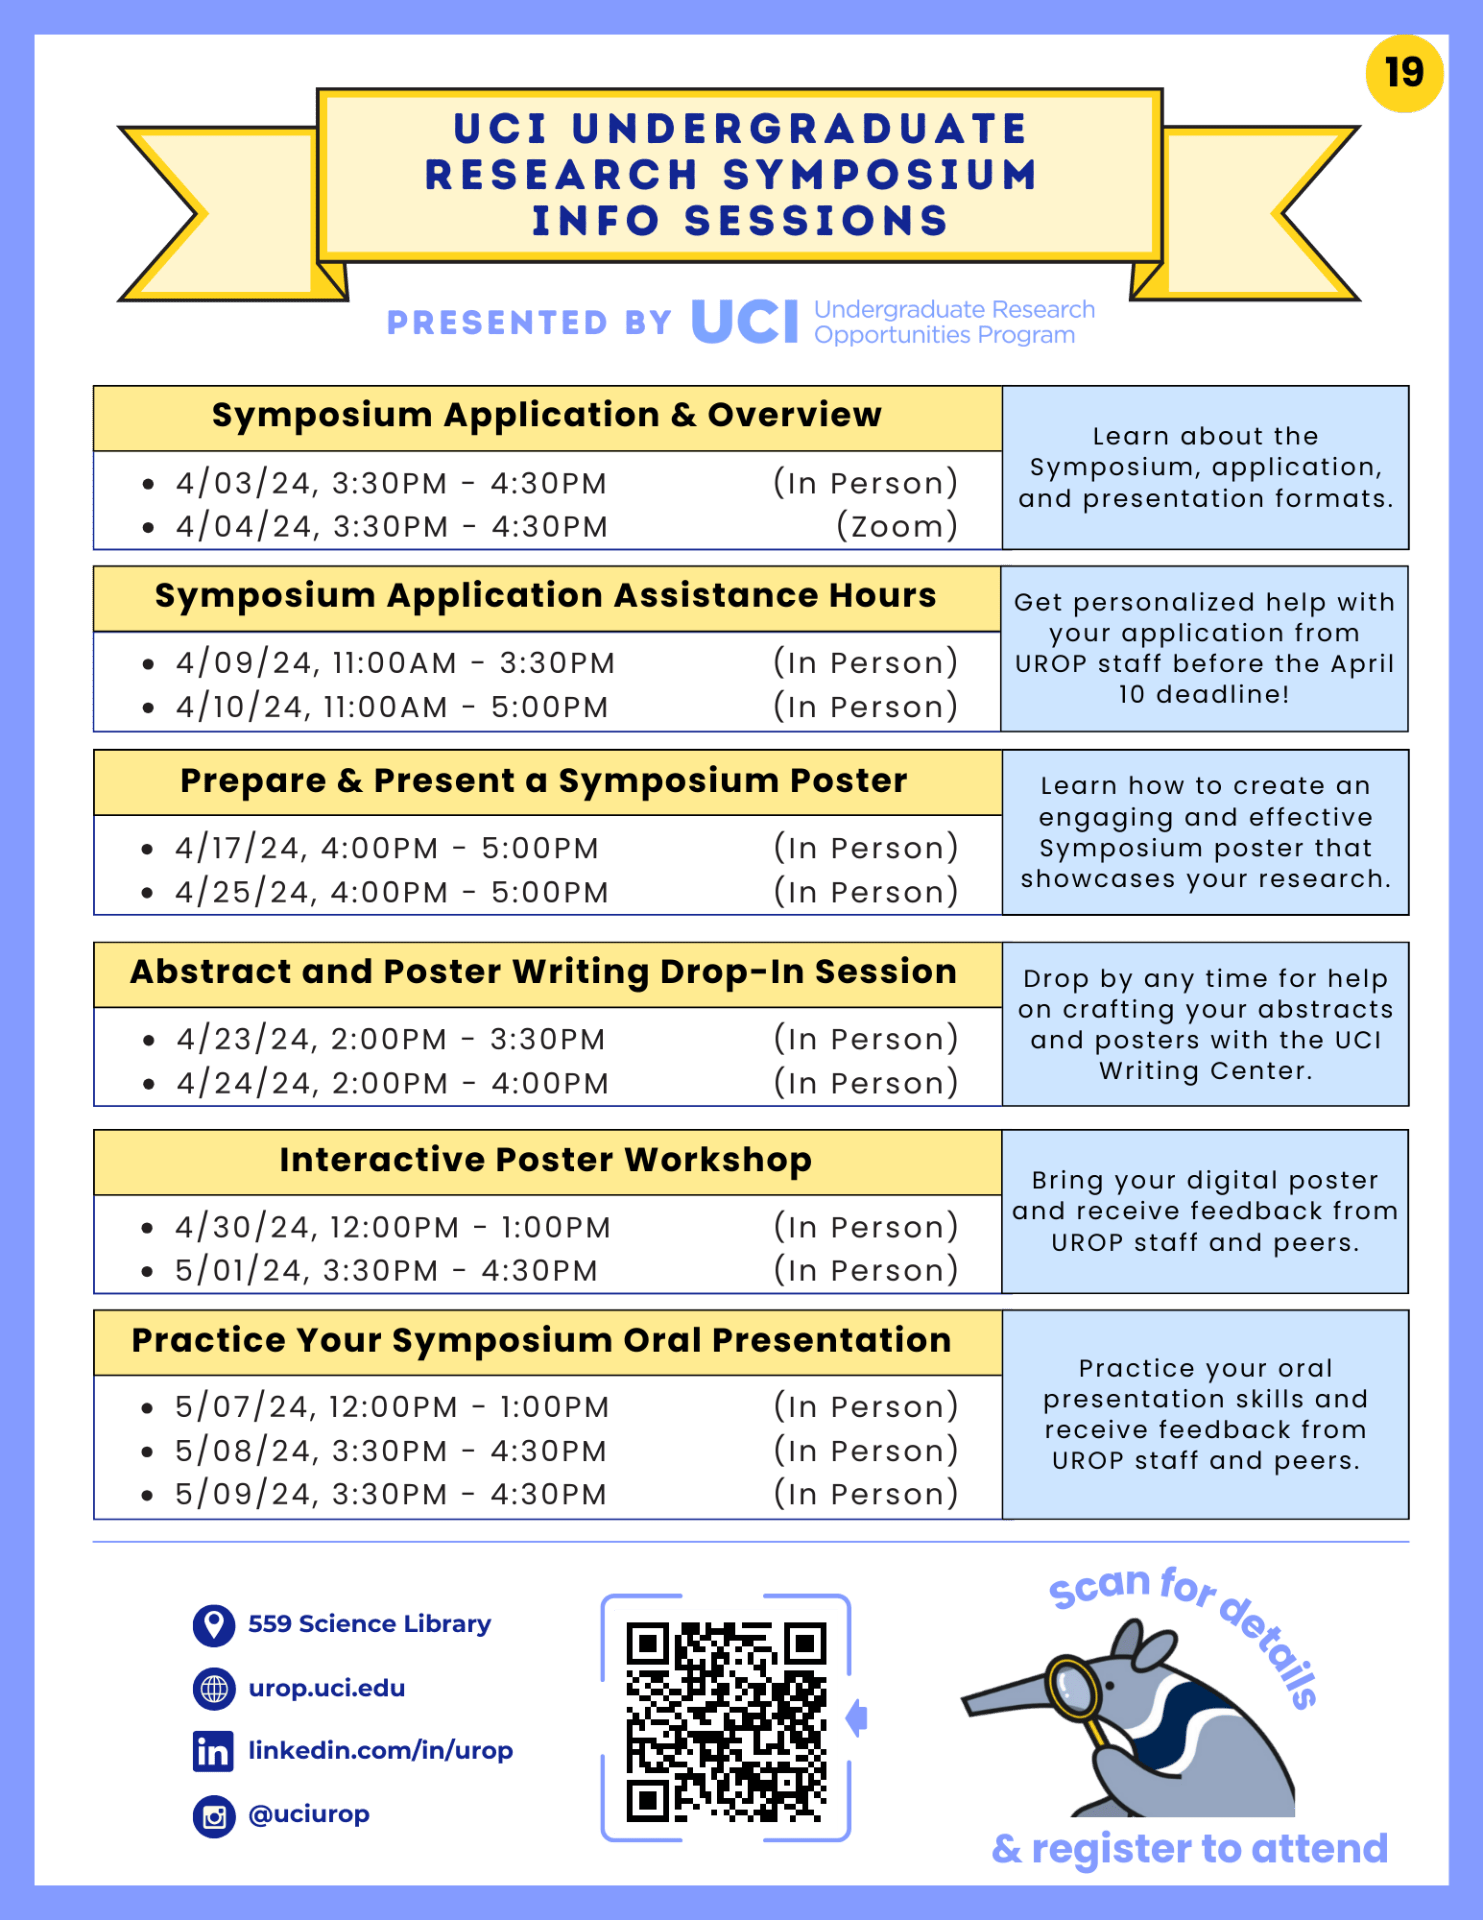 UROP Symposium Information Session Flyer (Links to CampusGroup Events Page)